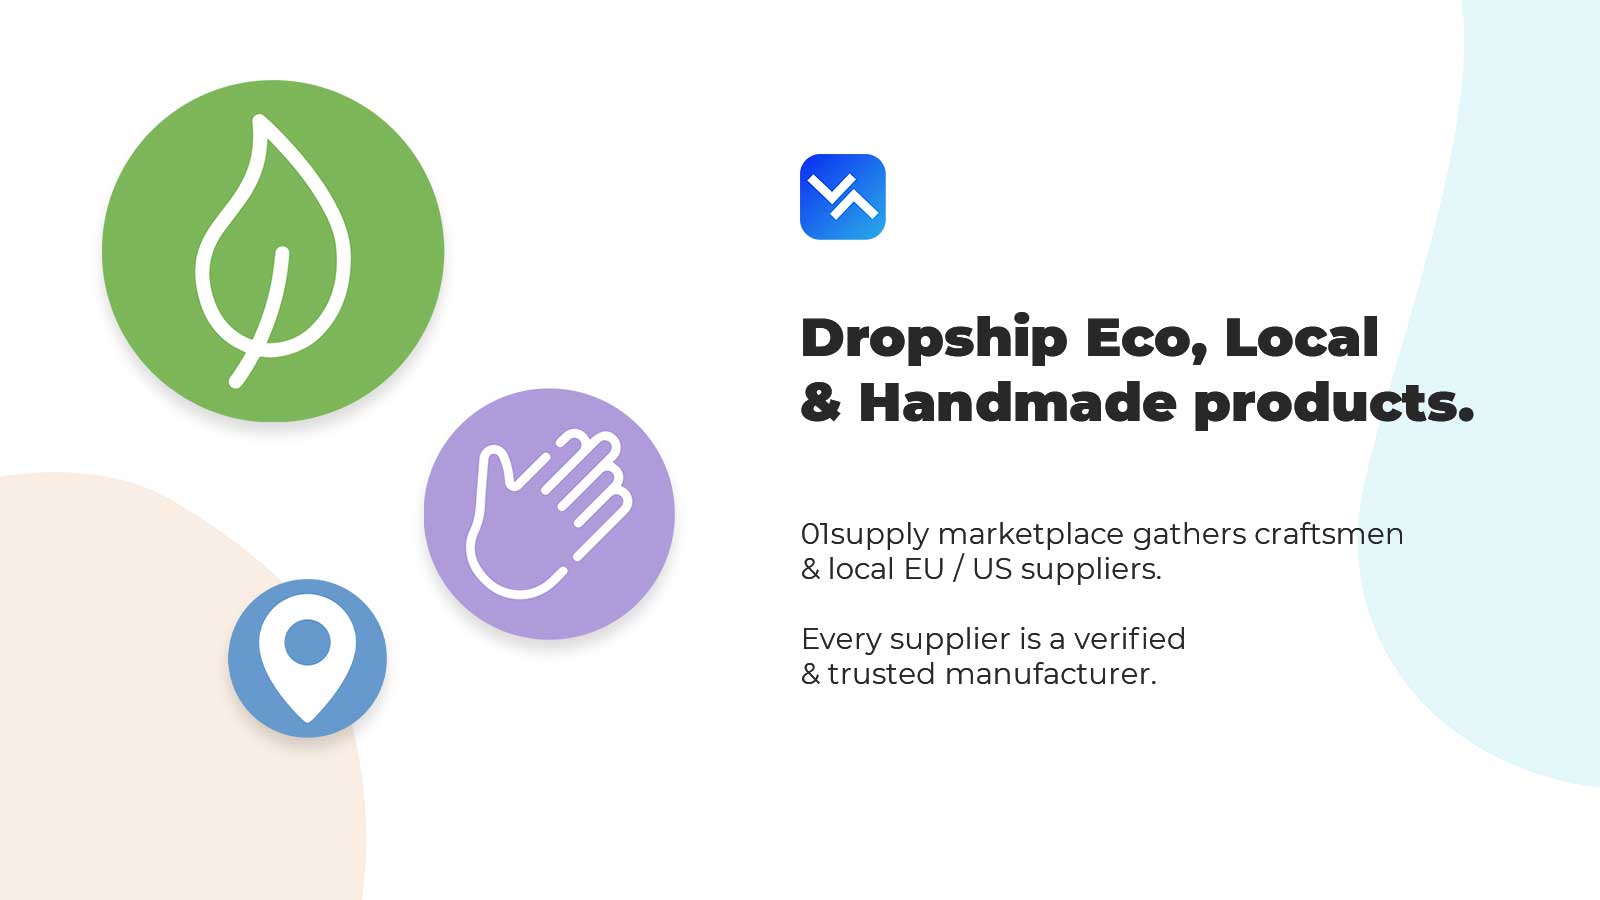 01supply ‑ Dropship Suppliers